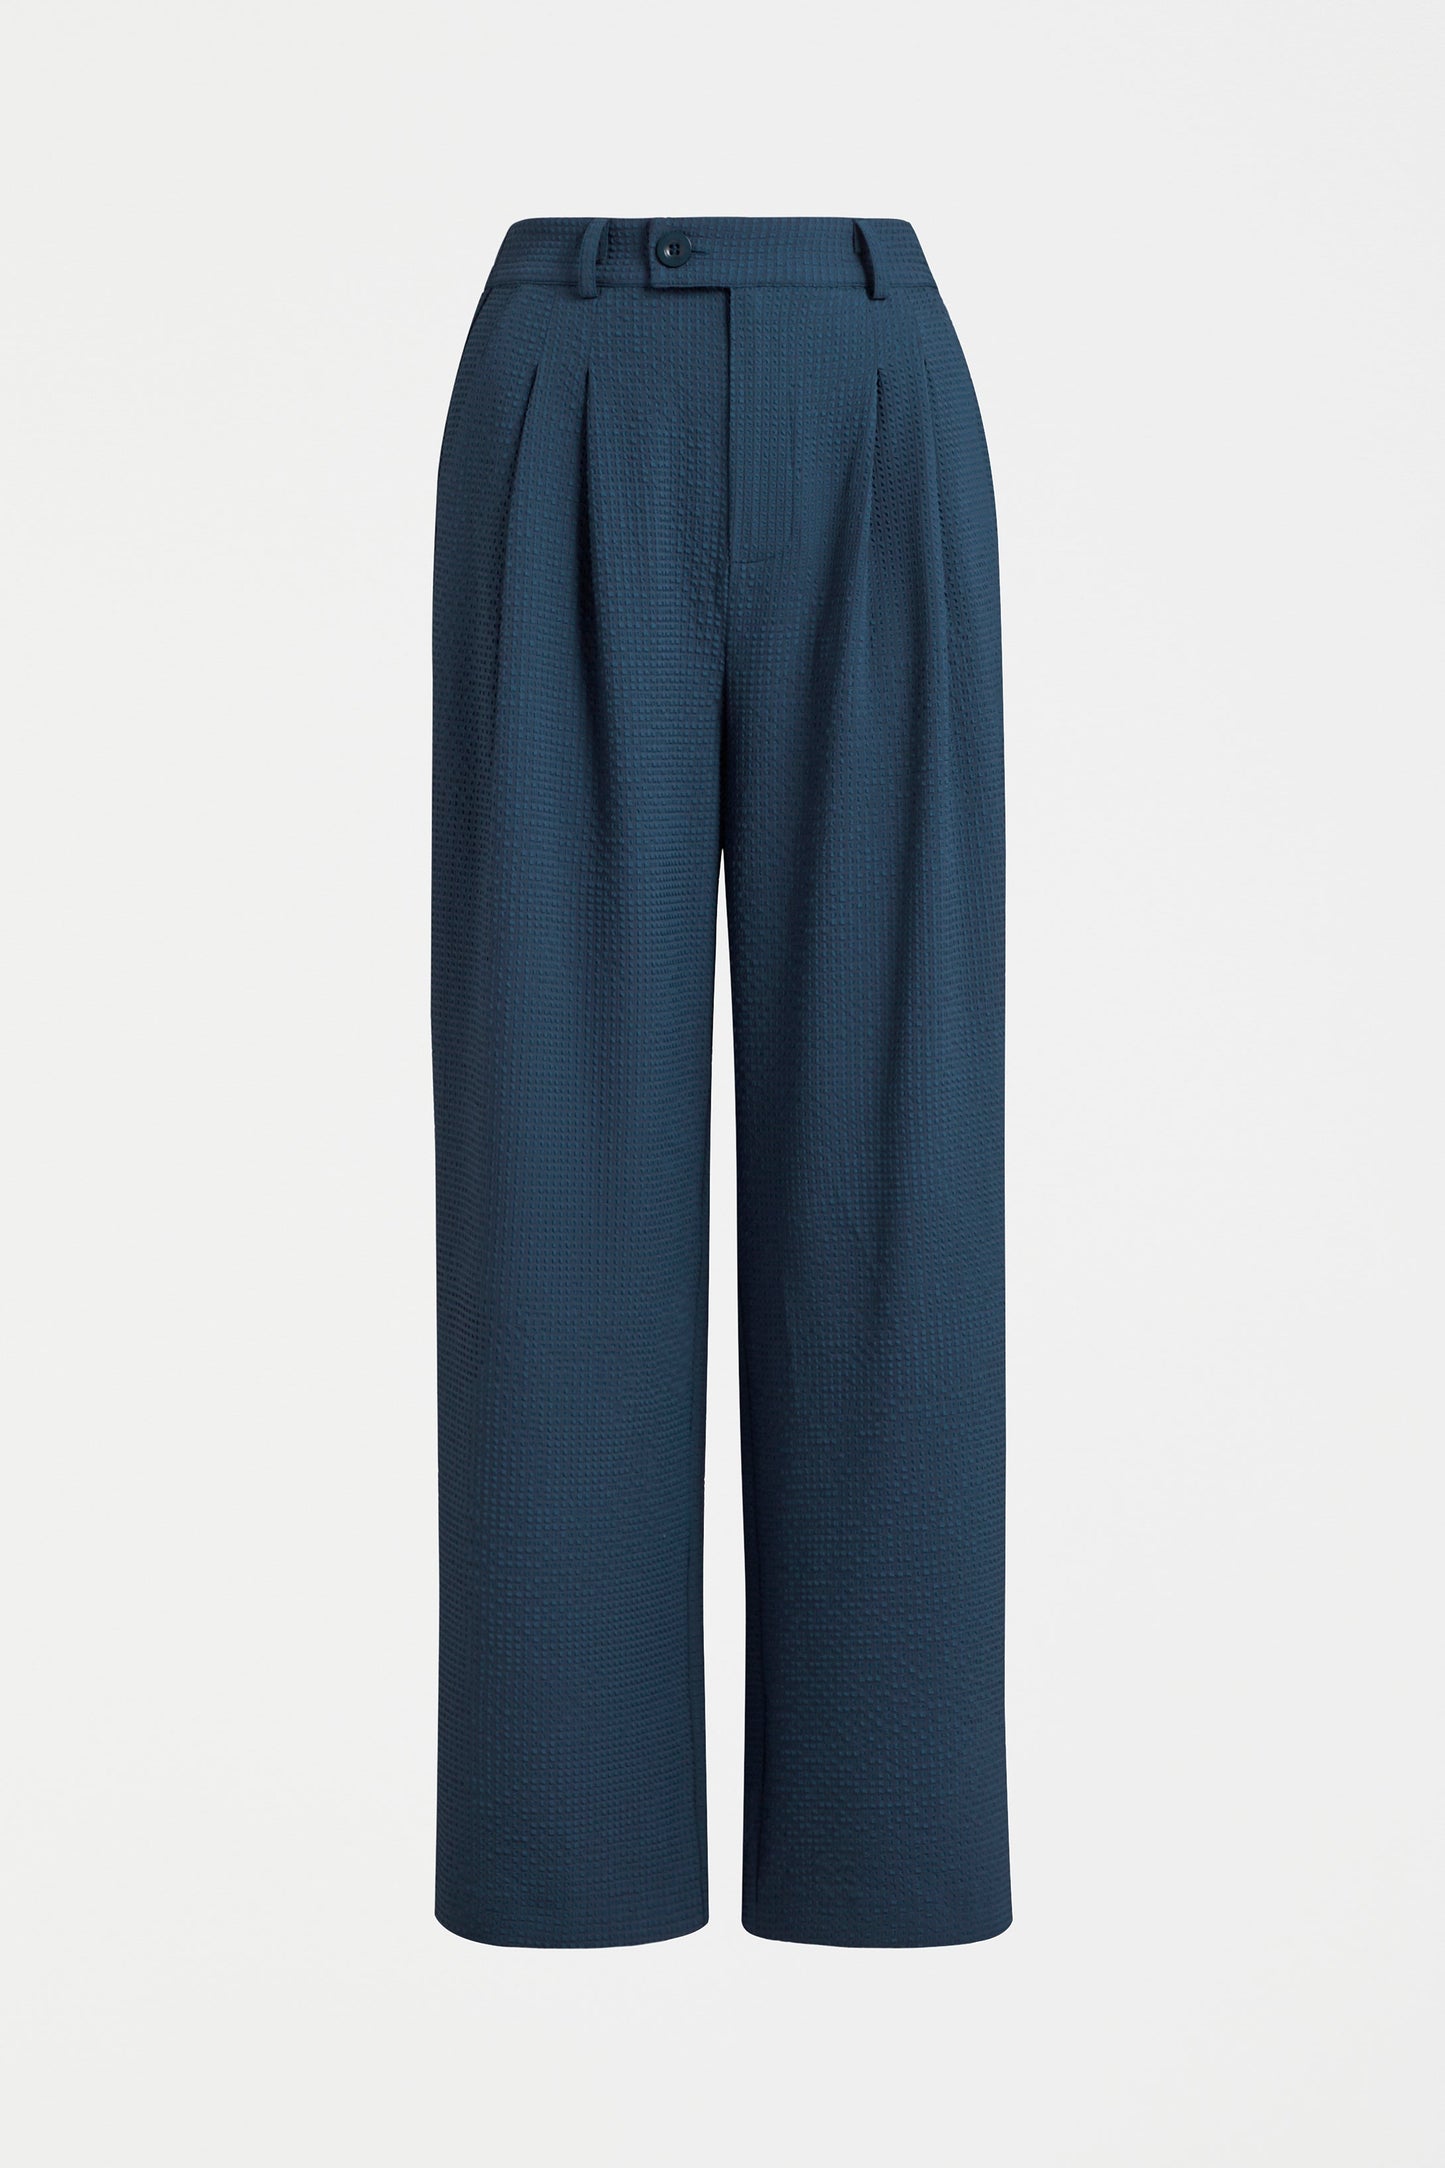 Deor Front Pleat Straight Leg Textured Pant Front | DEEP SEA BLUE